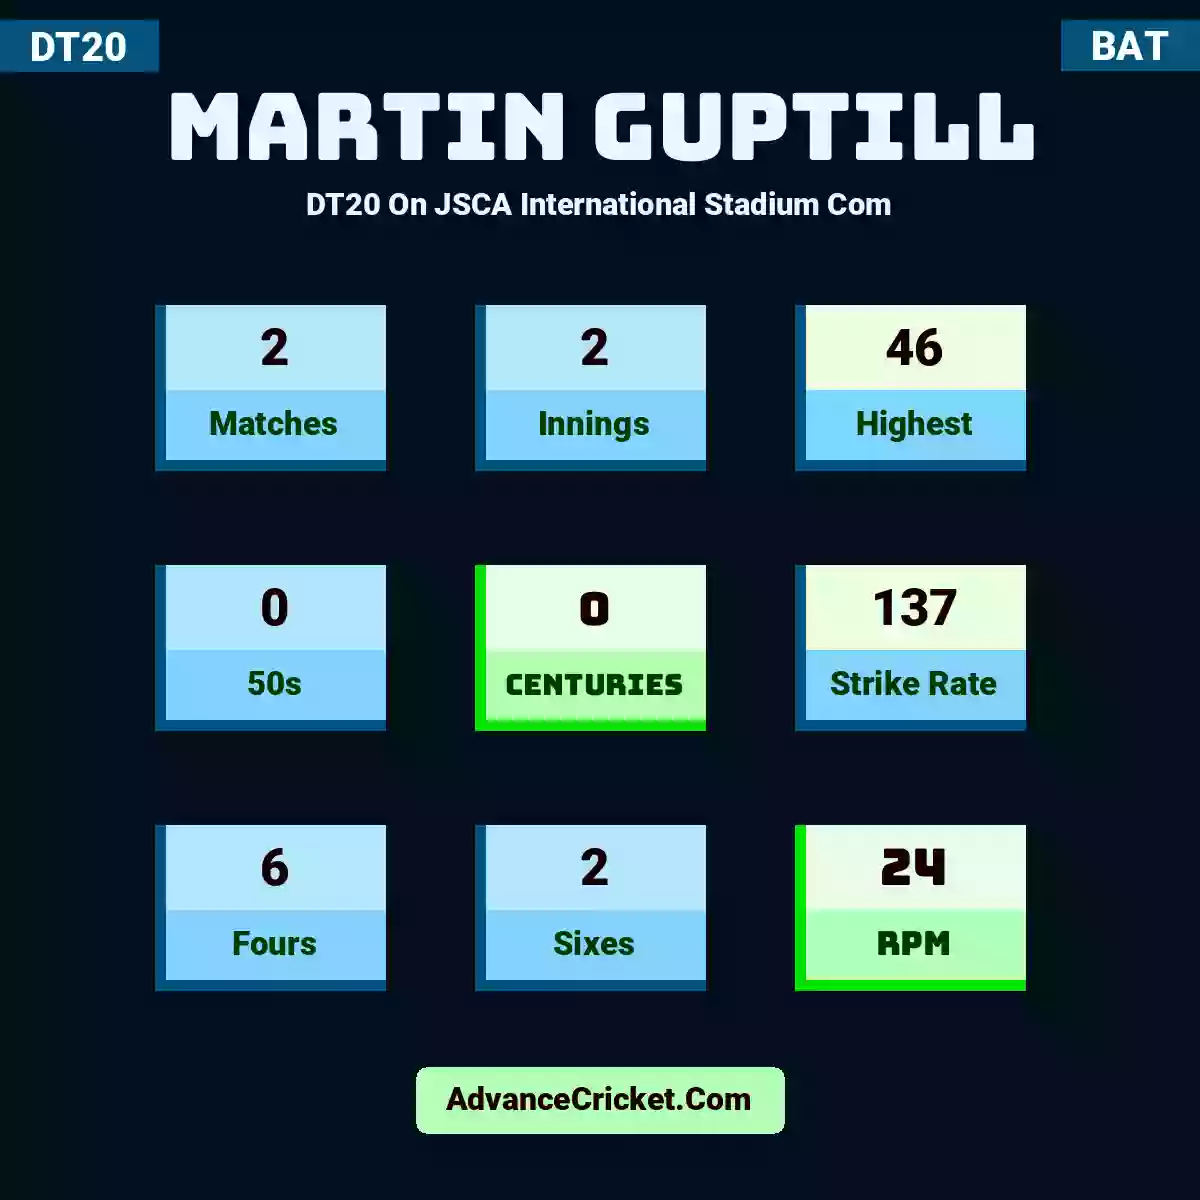 Martin Guptill DT20  On JSCA International Stadium Com, Martin Guptill played 2 matches, scored 46 runs as highest, 0 half-centuries, and 0 centuries, with a strike rate of 137. M.Guptill hit 6 fours and 2 sixes, with an RPM of 24.